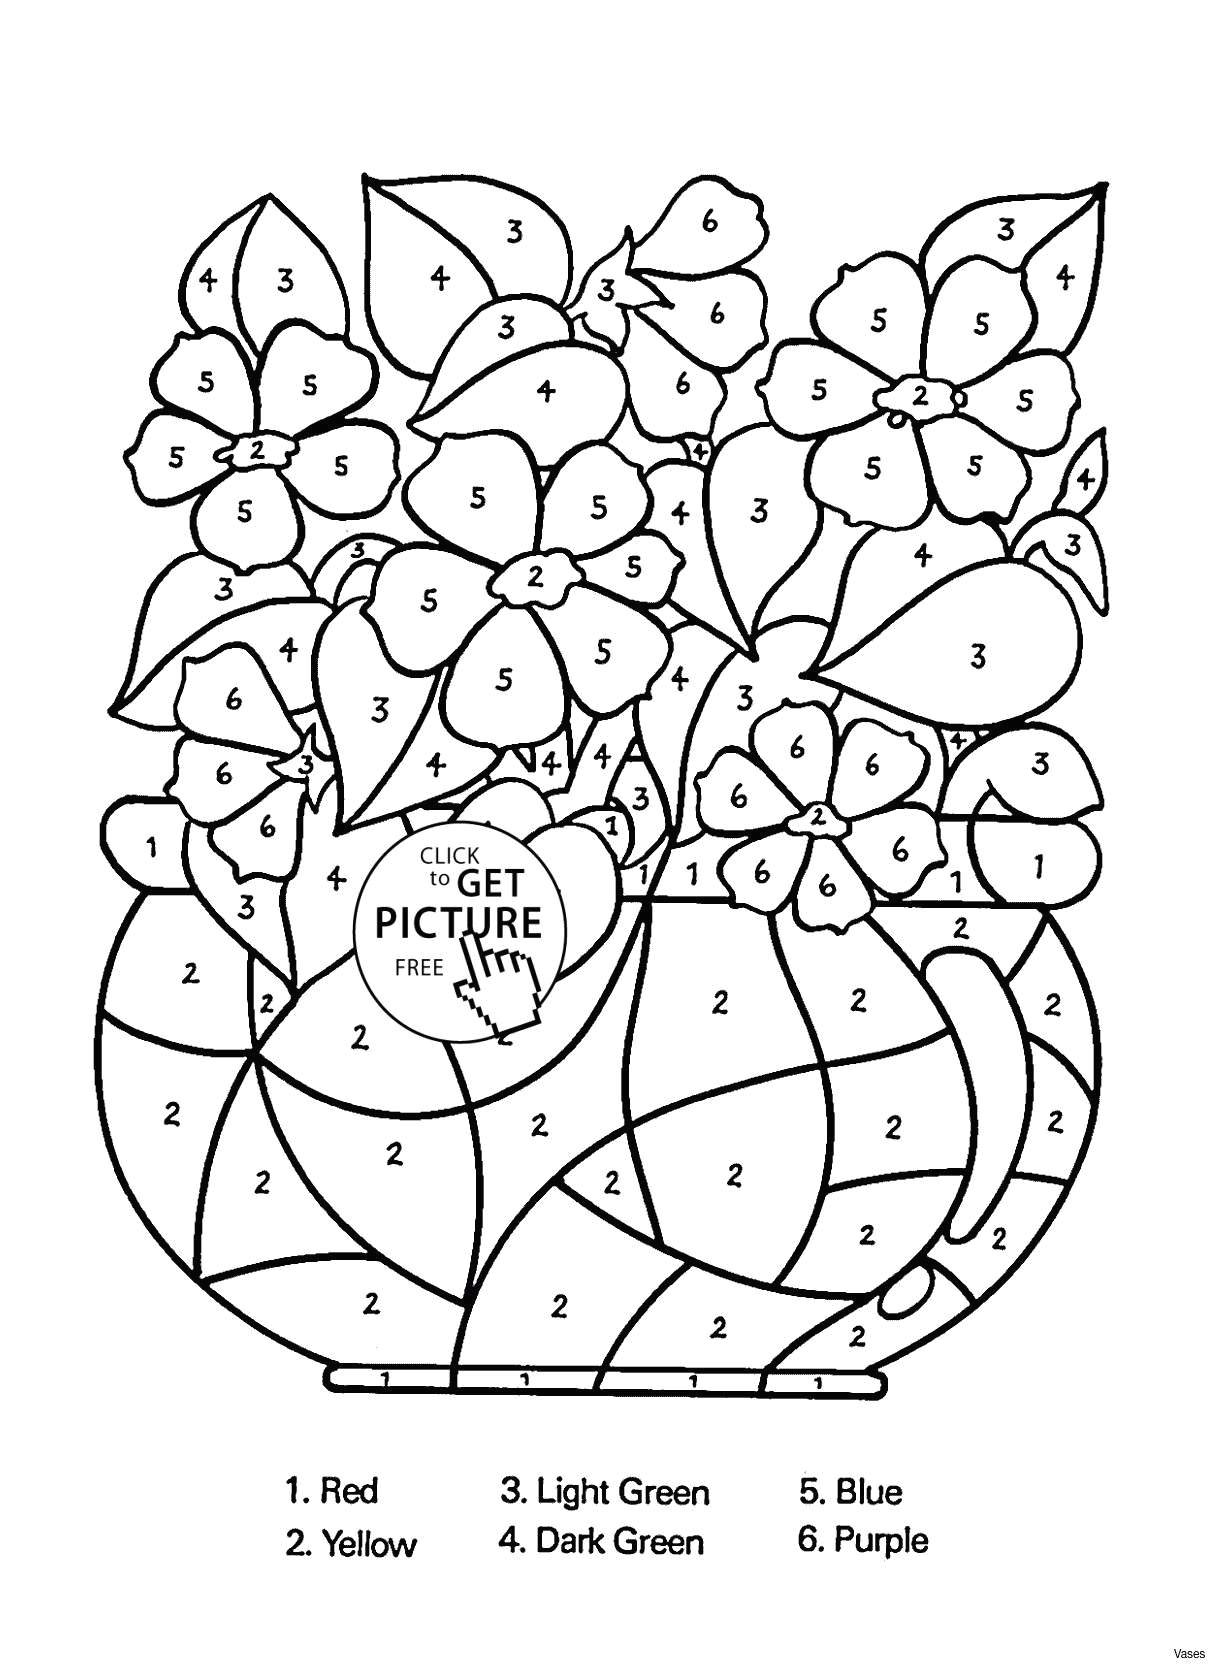 Line Drawing Of Flower Vase New Vases Flower Vase Coloring Page Pages Flowers In A top I 0d and